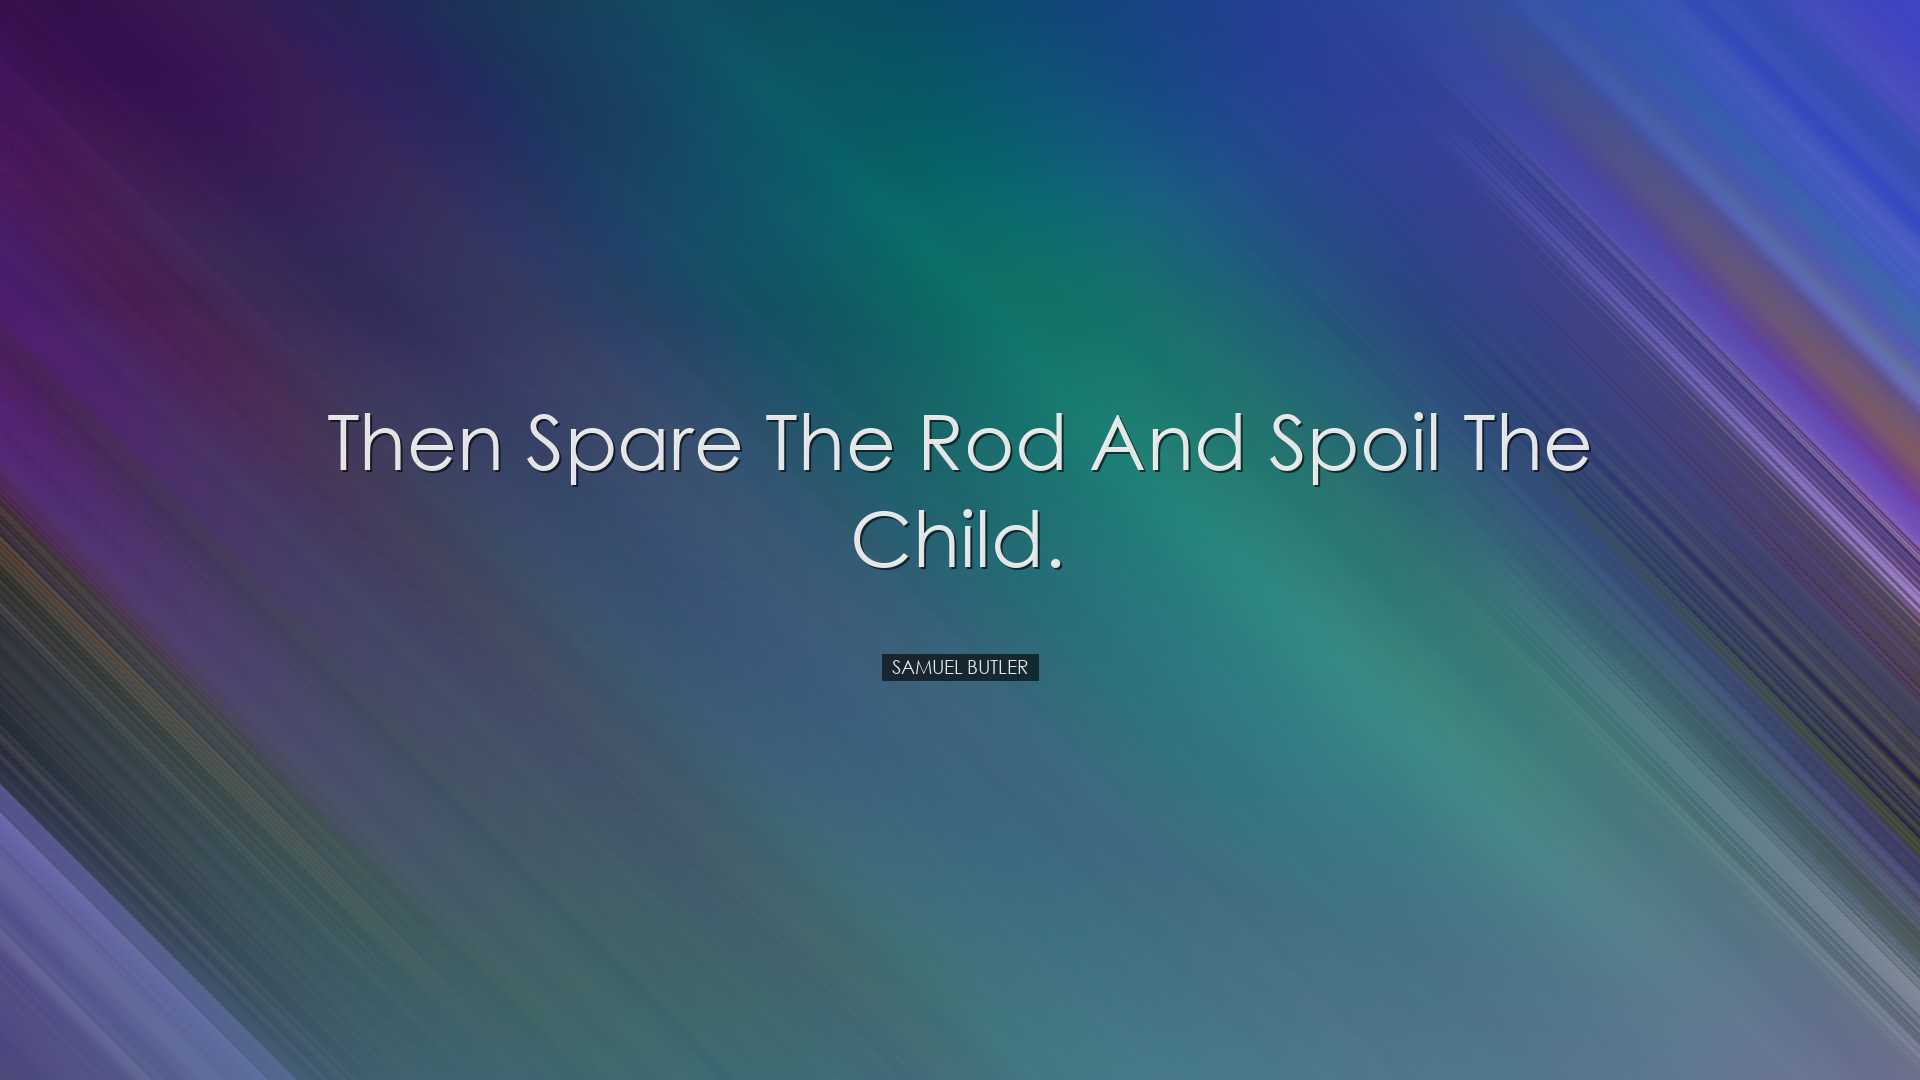 Then spare the rod and spoil the child. - Samuel Butler